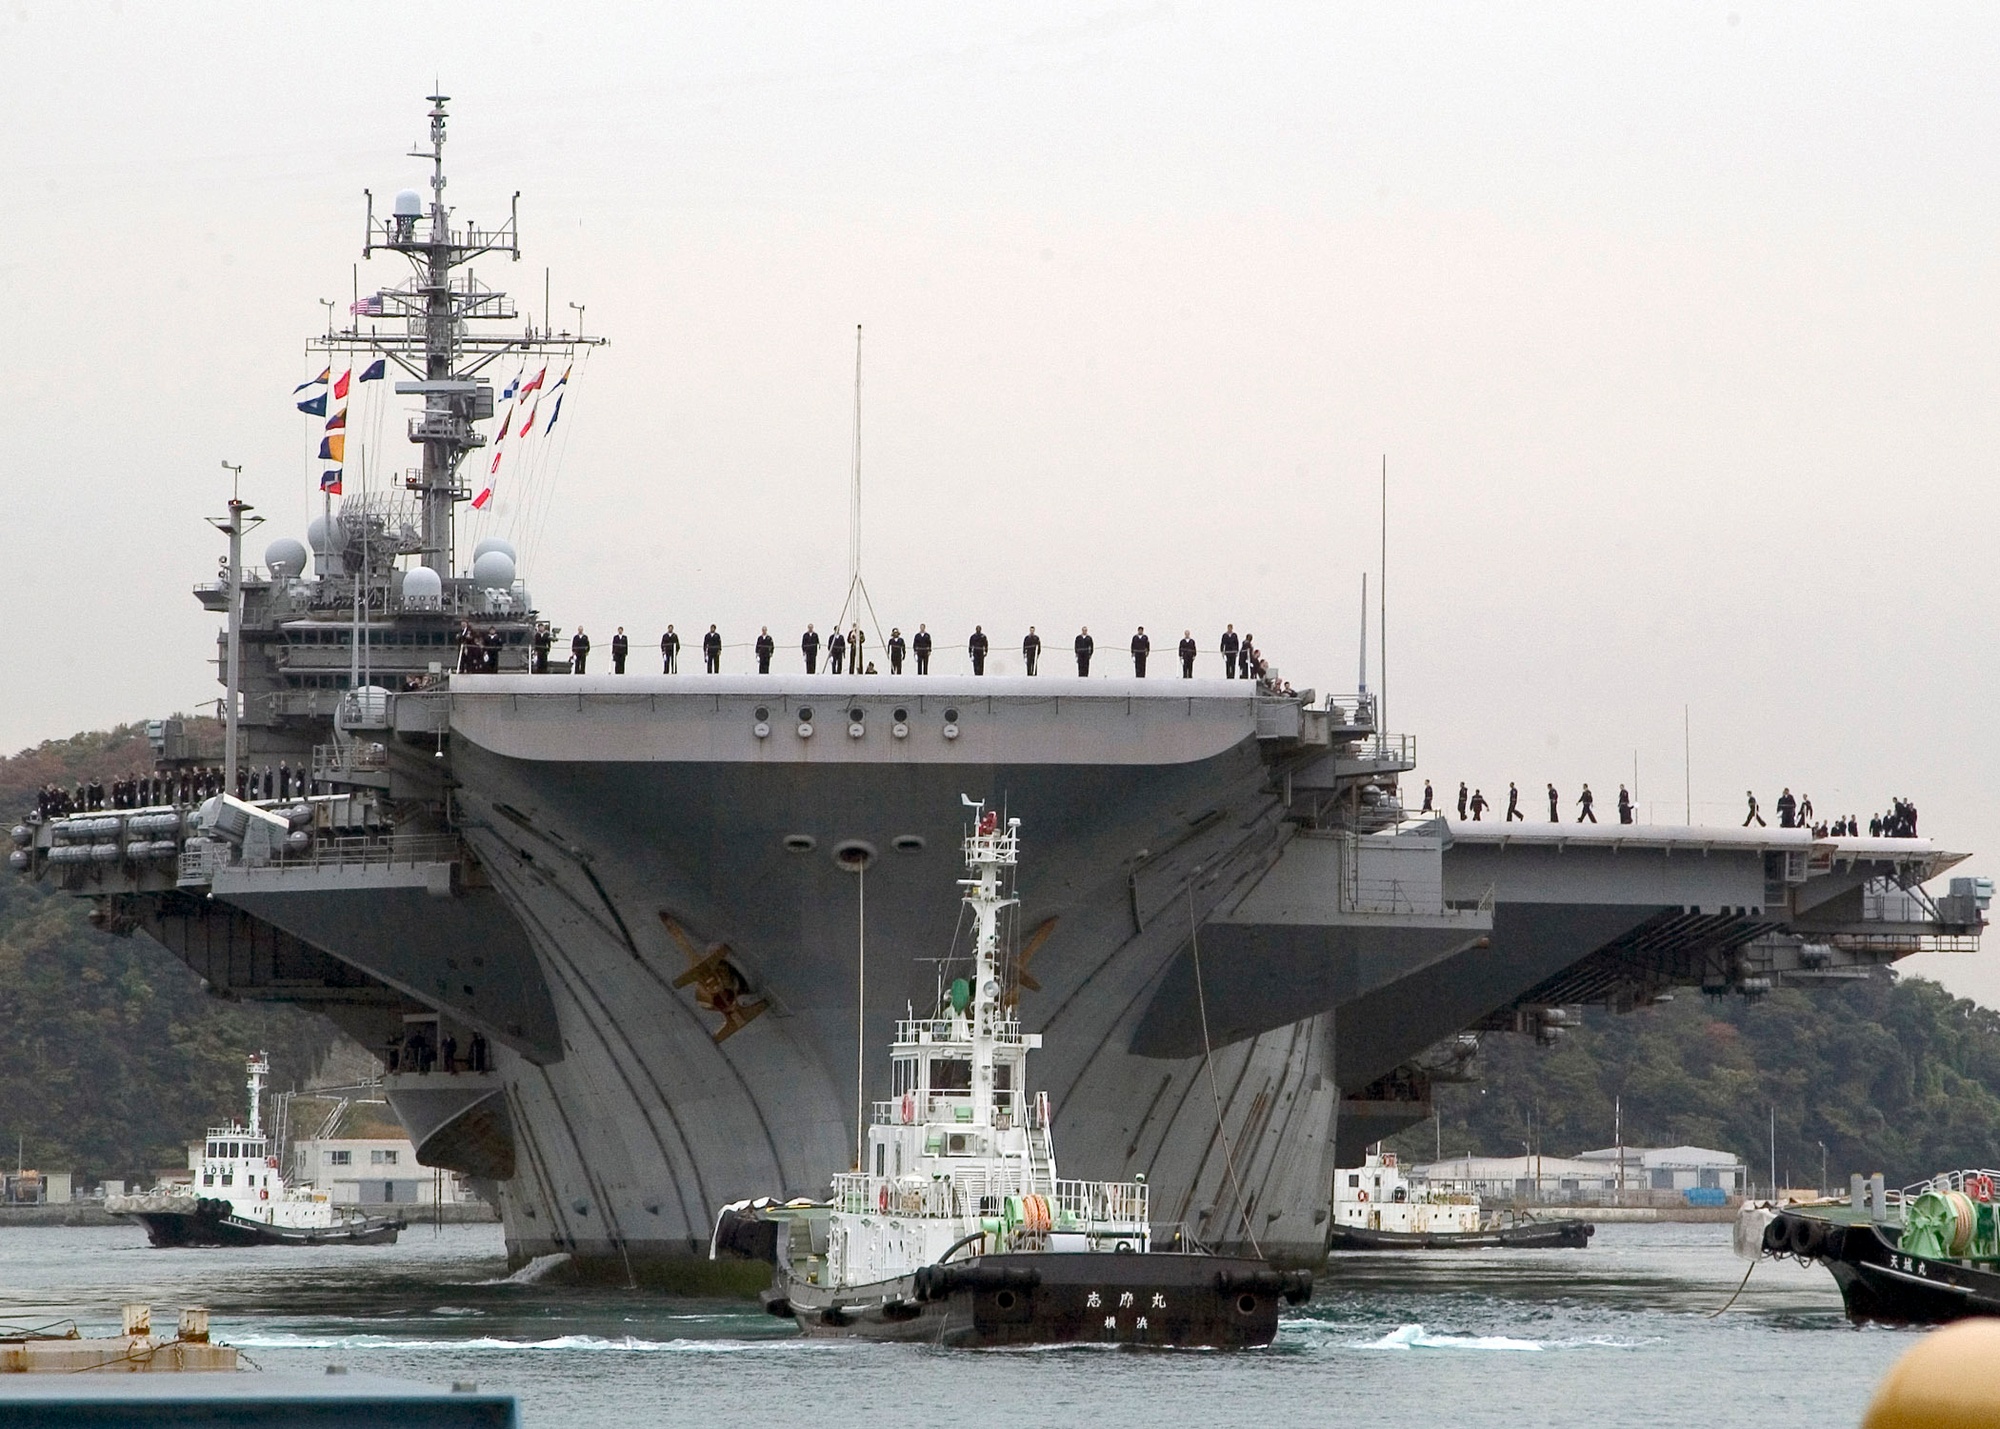 DVIDS - Images - USS Kitty Hawk arrives in port [Image 1 of 2]